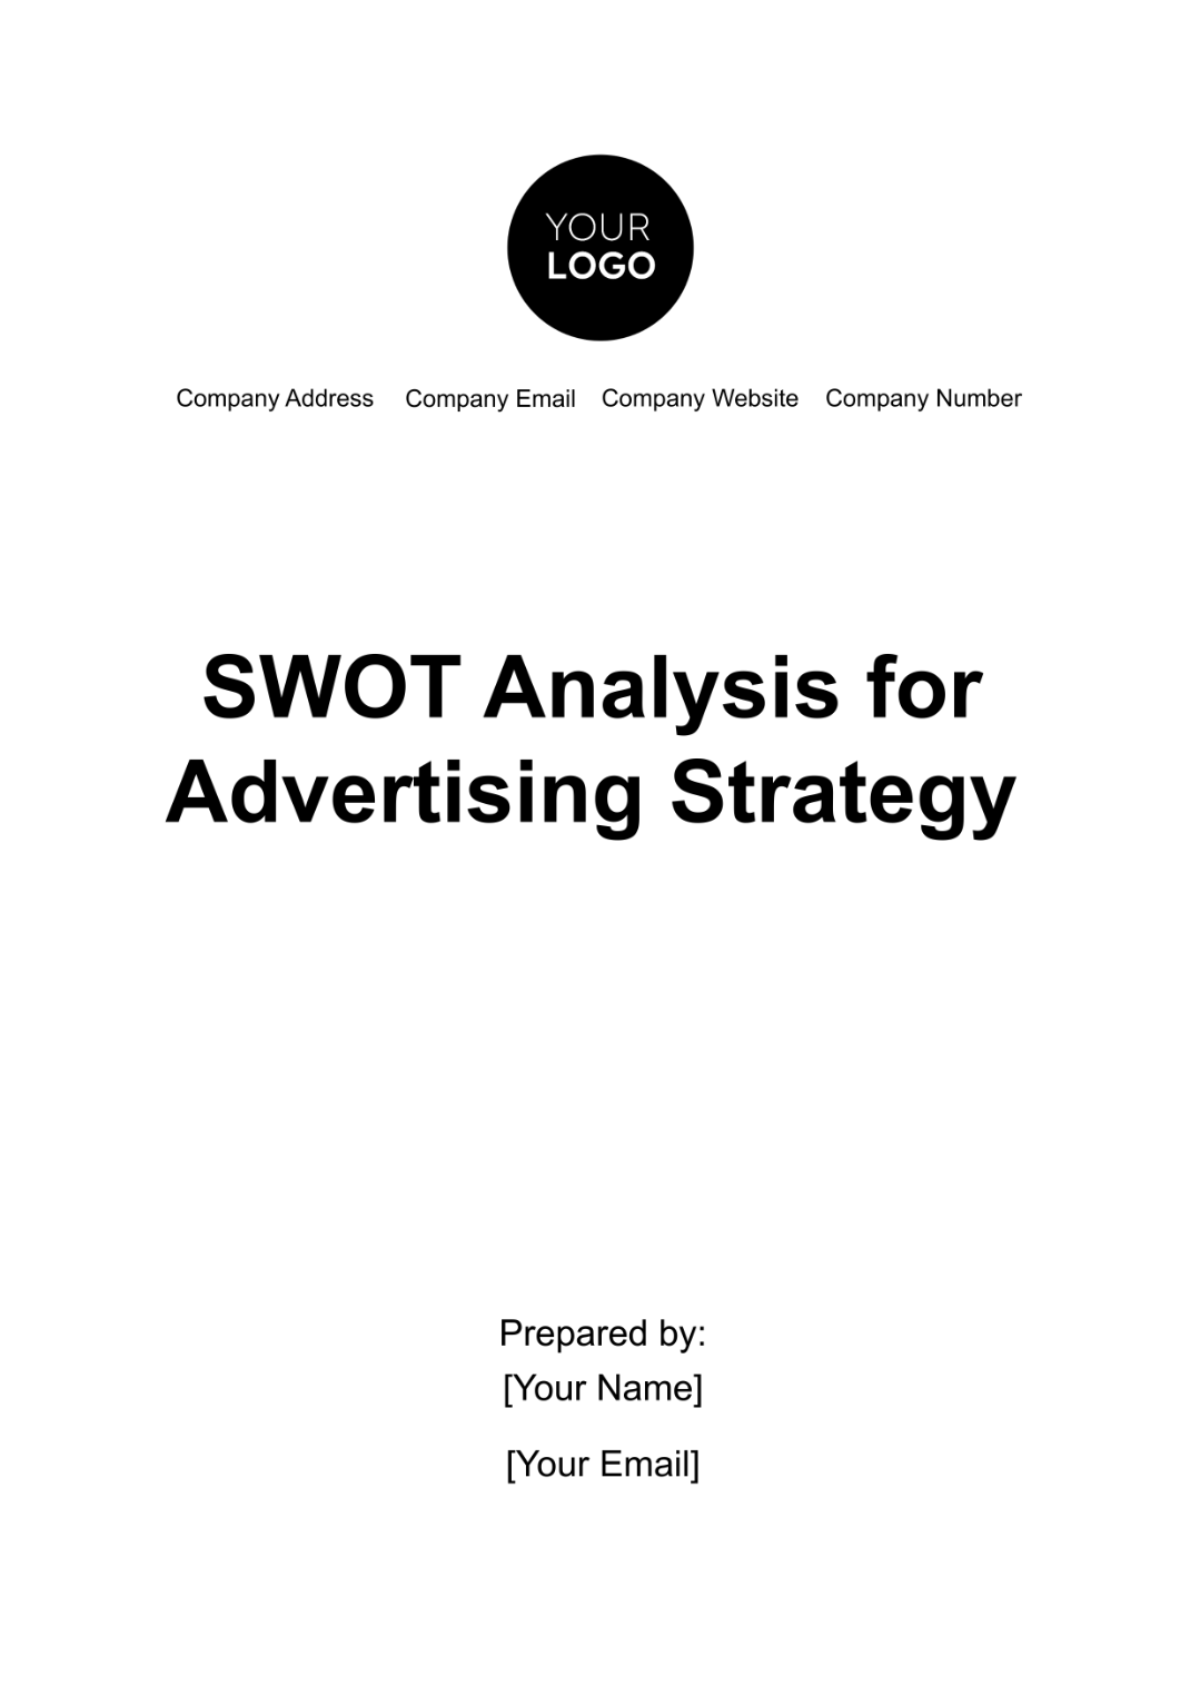 SWOT Analysis for Advertising Strategy Template